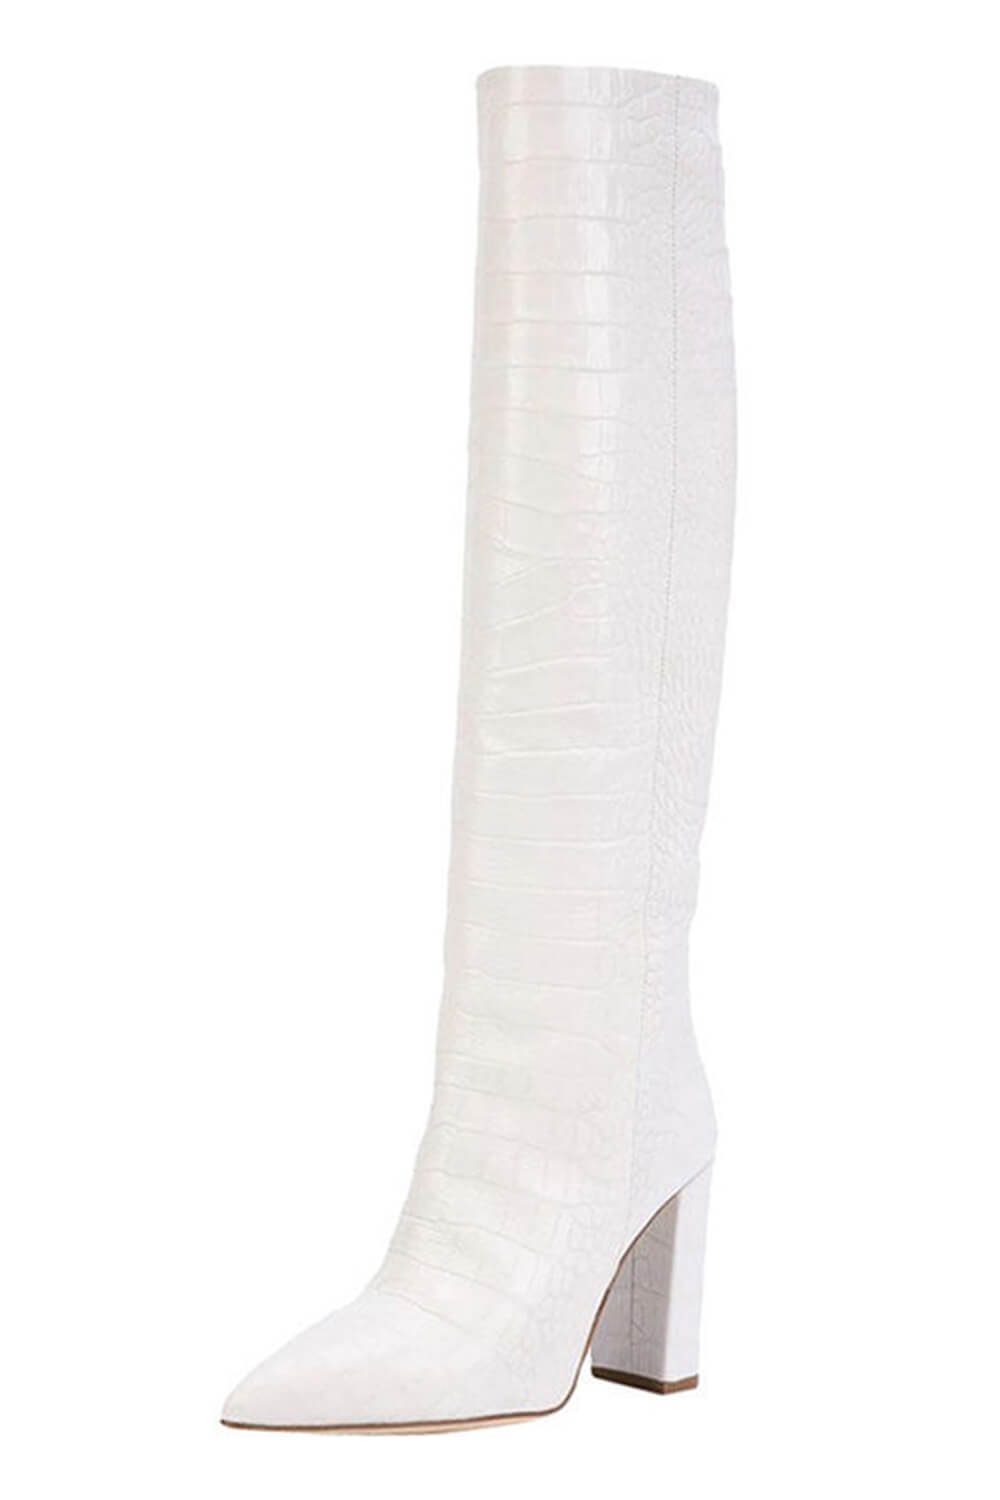 Croc-Effect Faux Leather Pointed Toe Block Heel Knee-High Boots - White